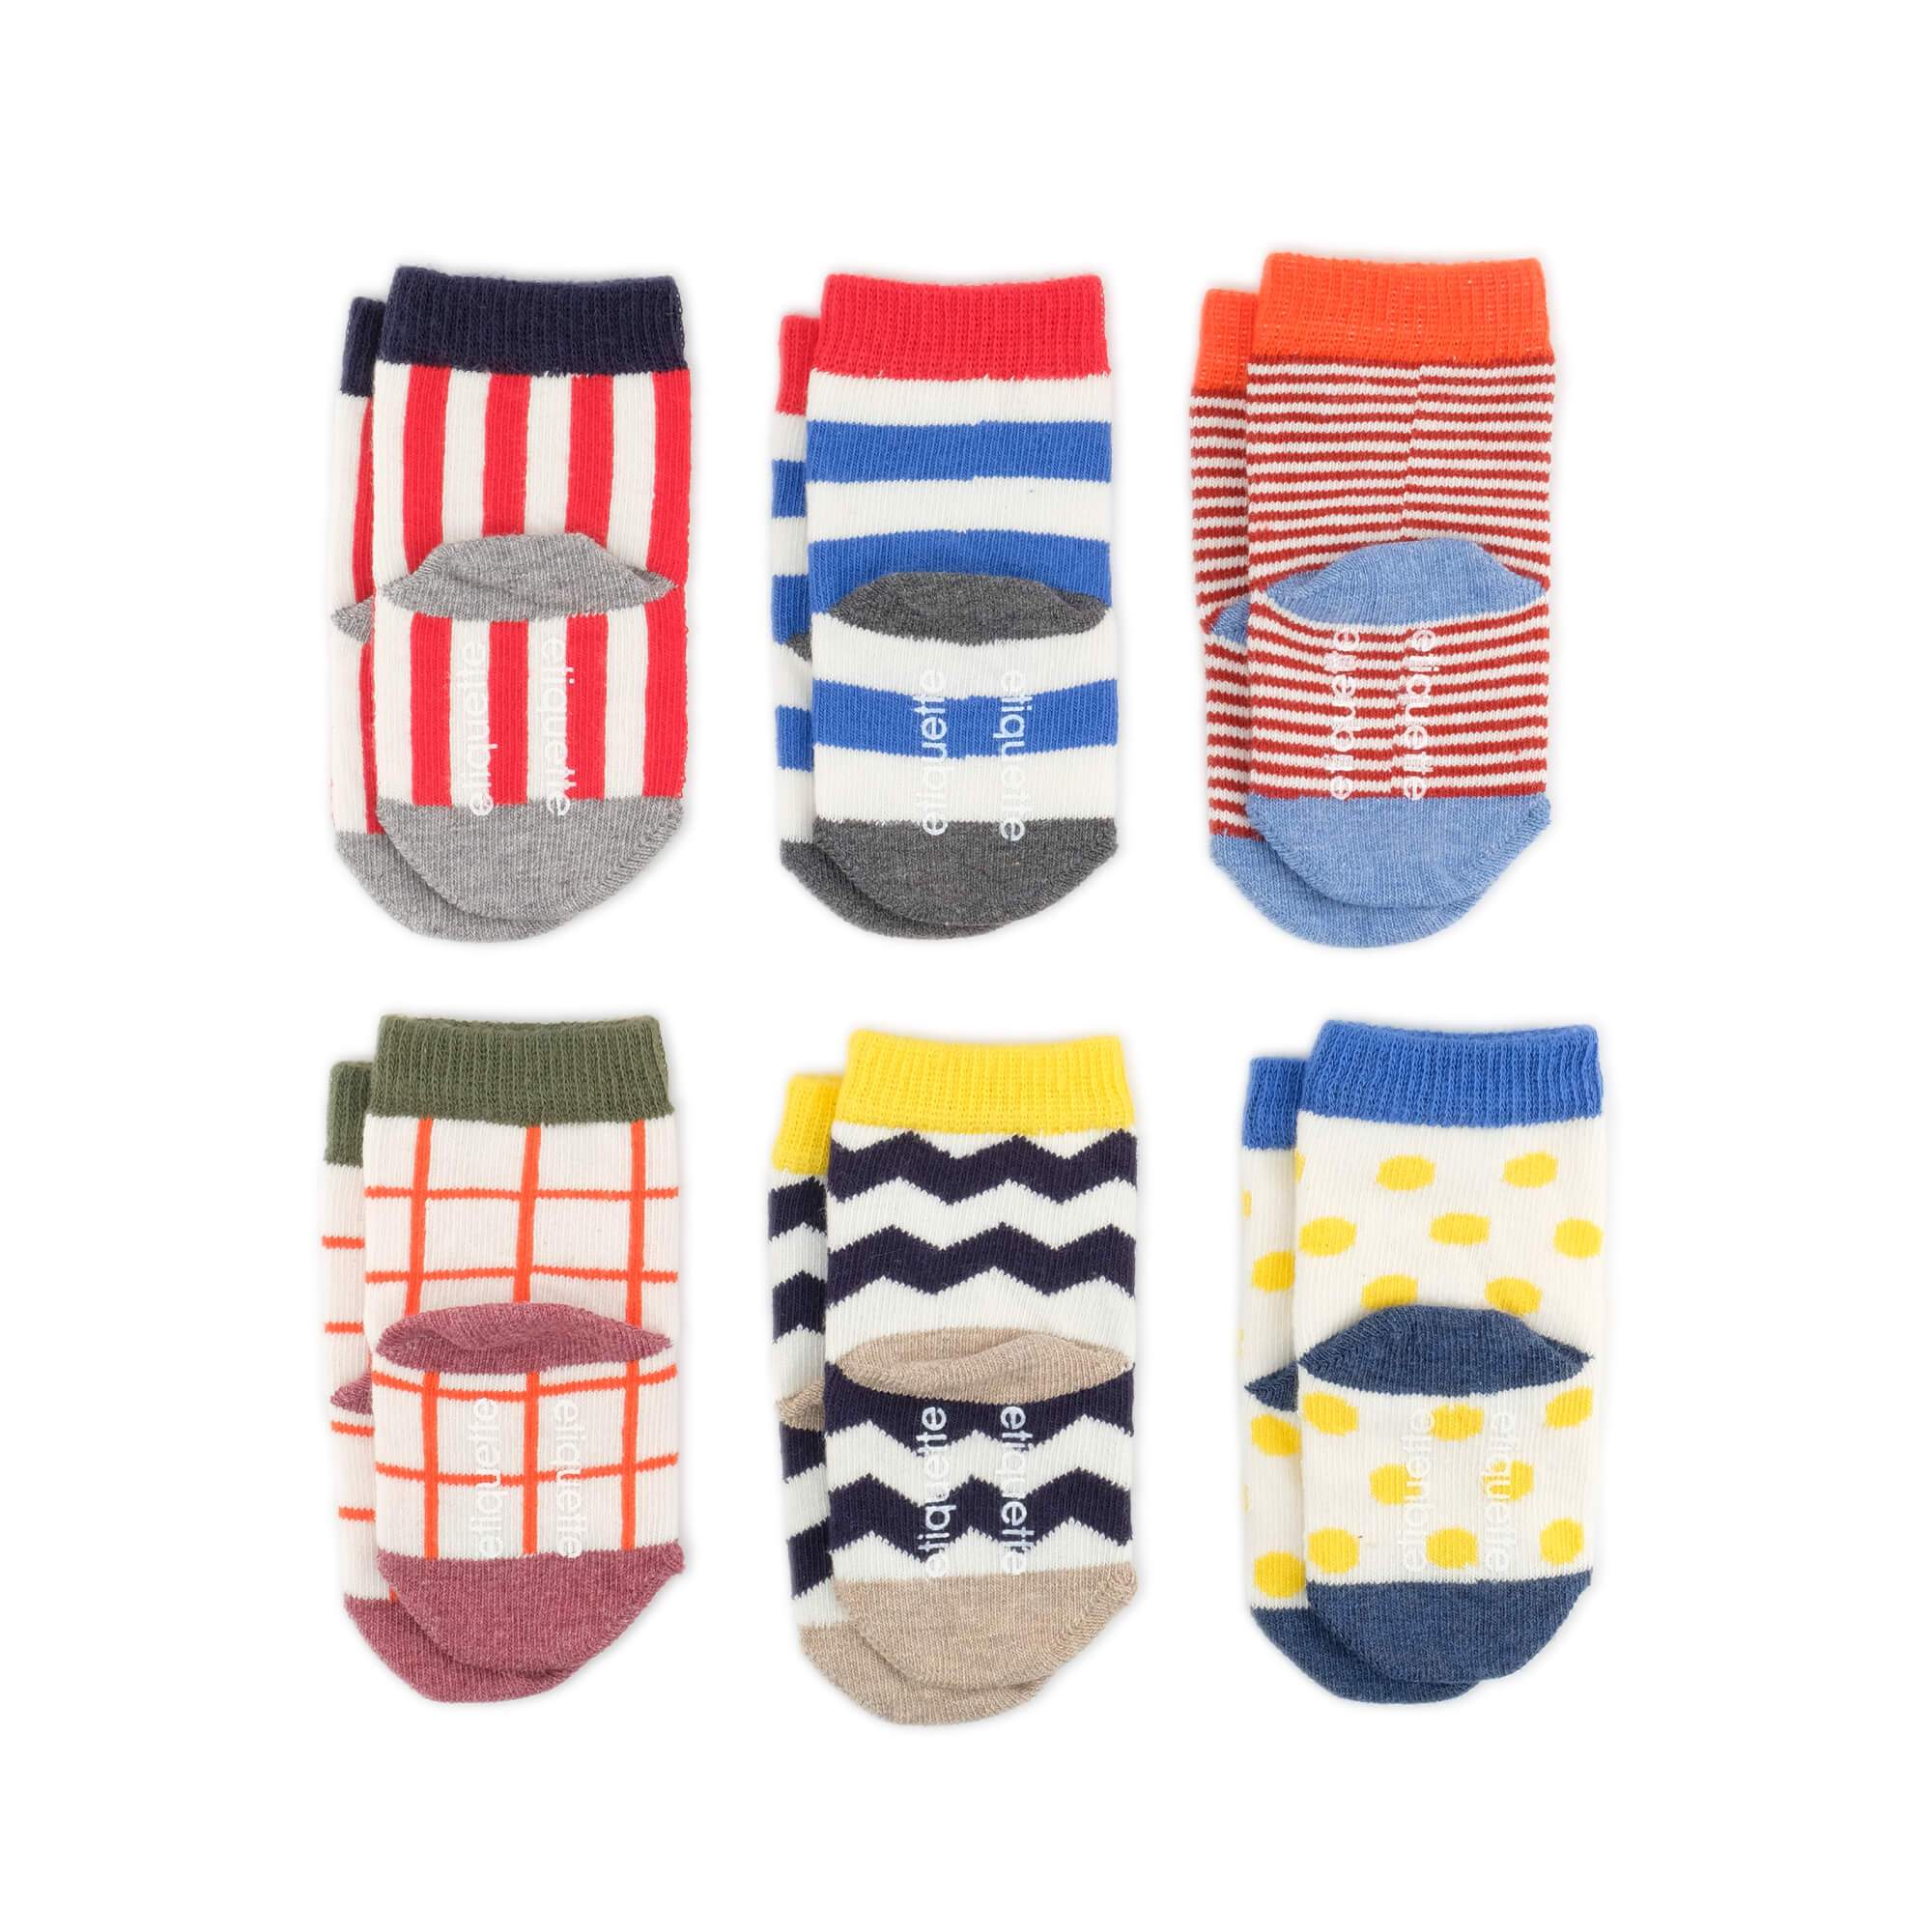 Baby Socks - Graphix Baby Socks Gift Box - Colorful baby socks - product back view⎪Lil'Etiquette Clothiers